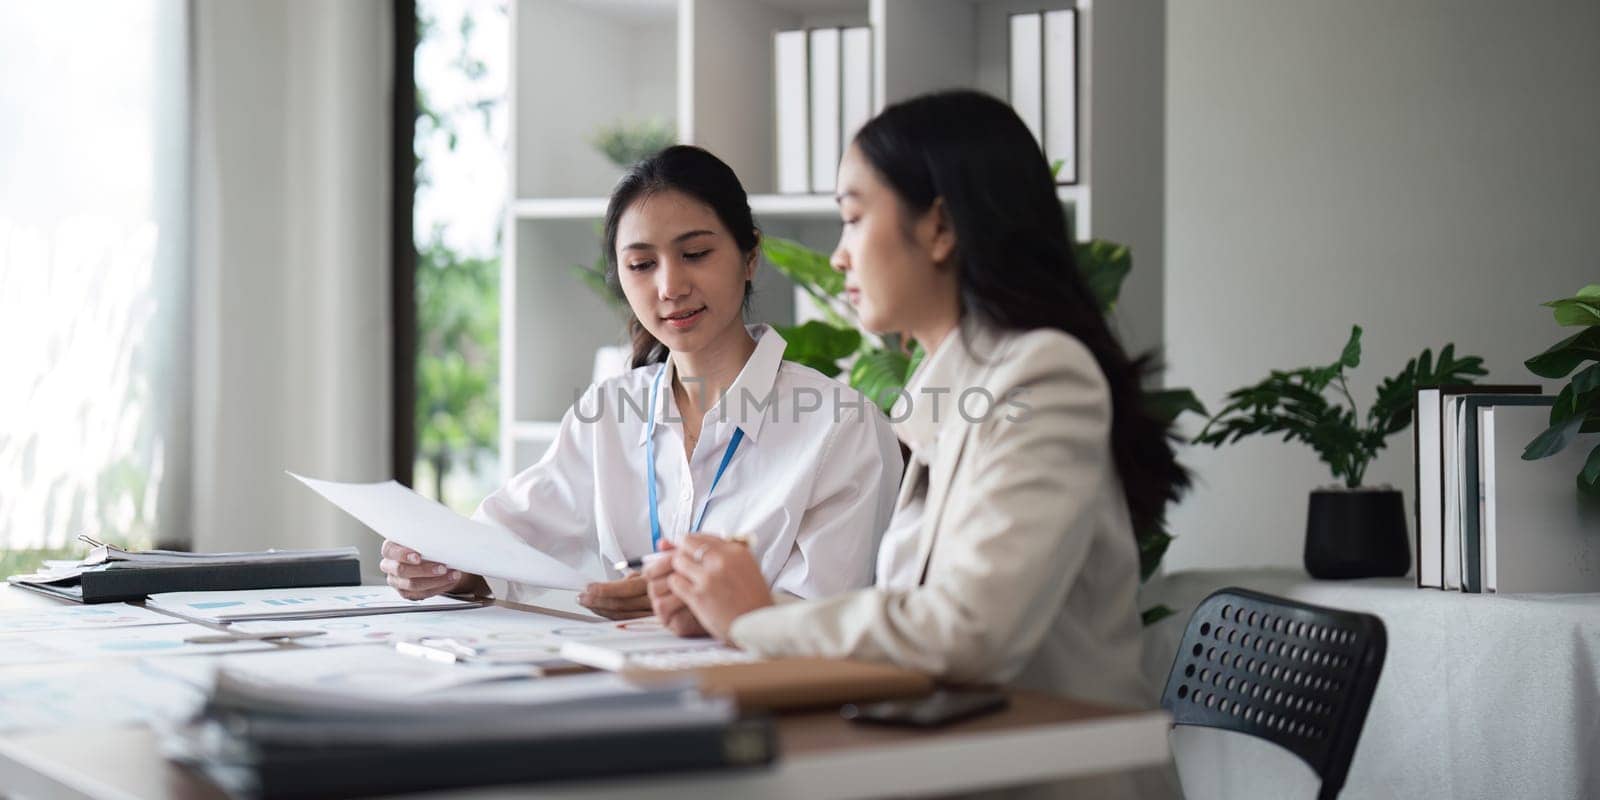 Two young businesswomen reviewing documents in a modern office.